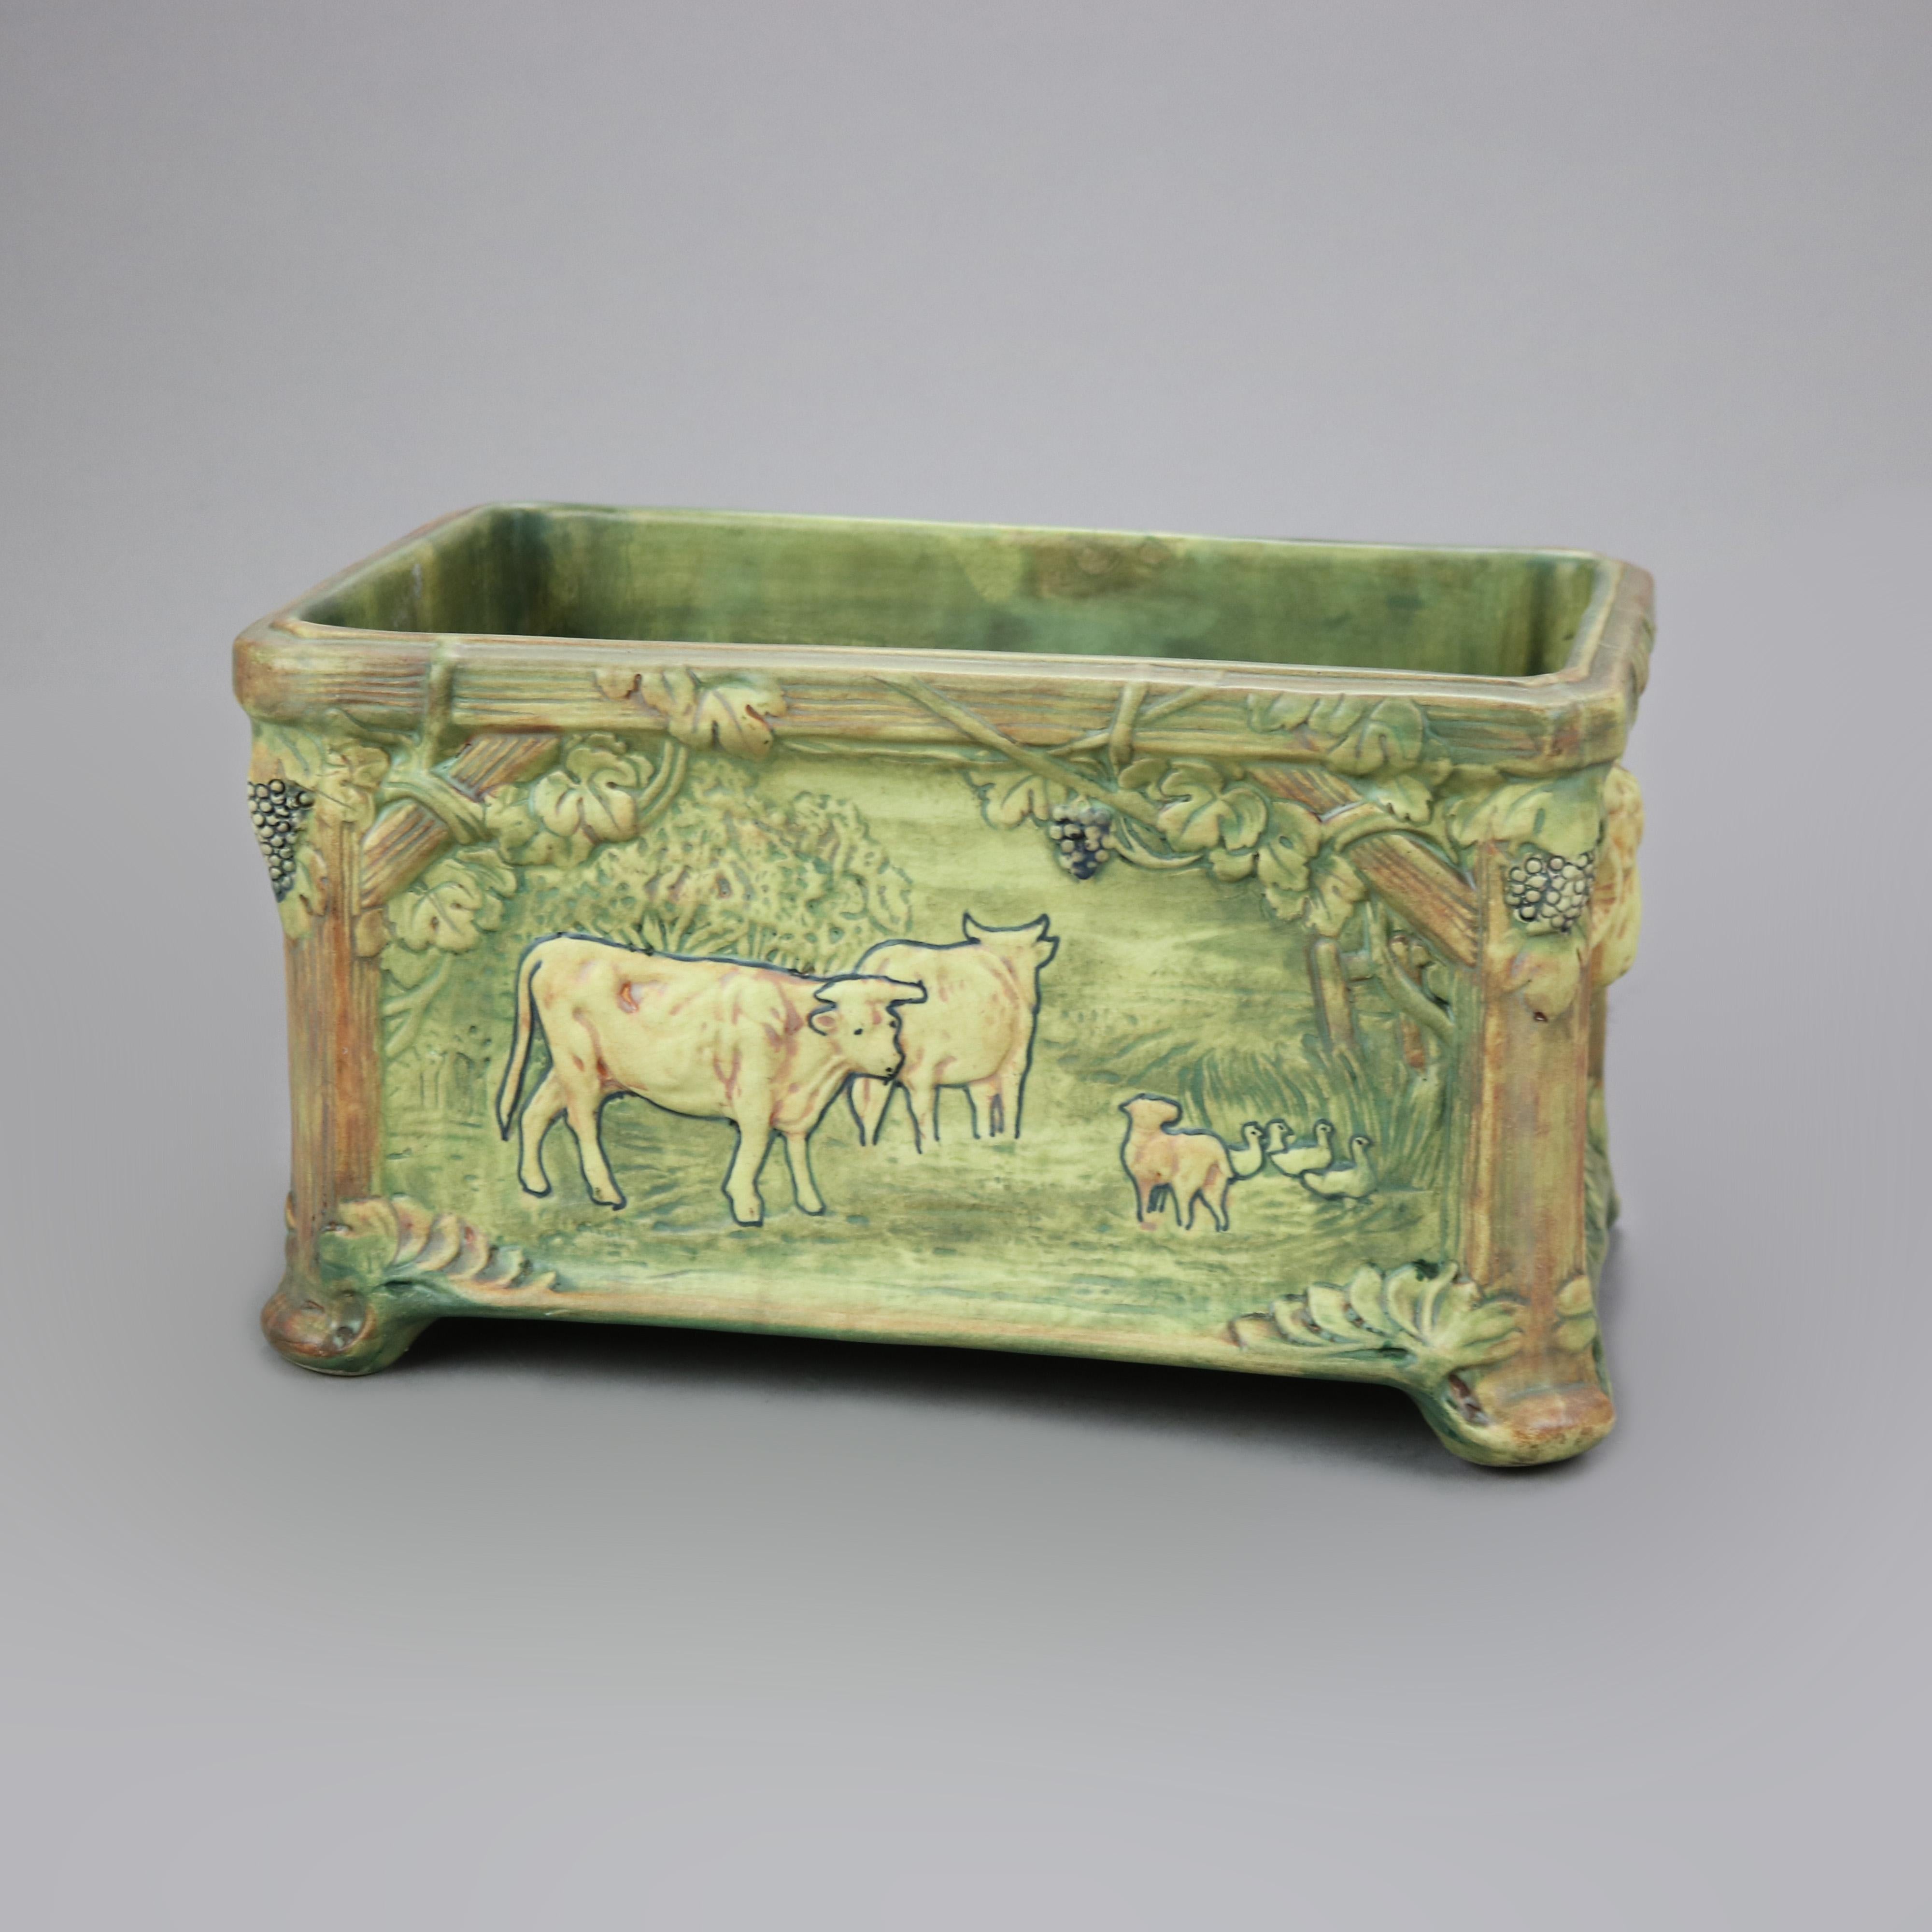 20th Century Antique Weller Art Pottery Planter Window Box Form with Cows c1930